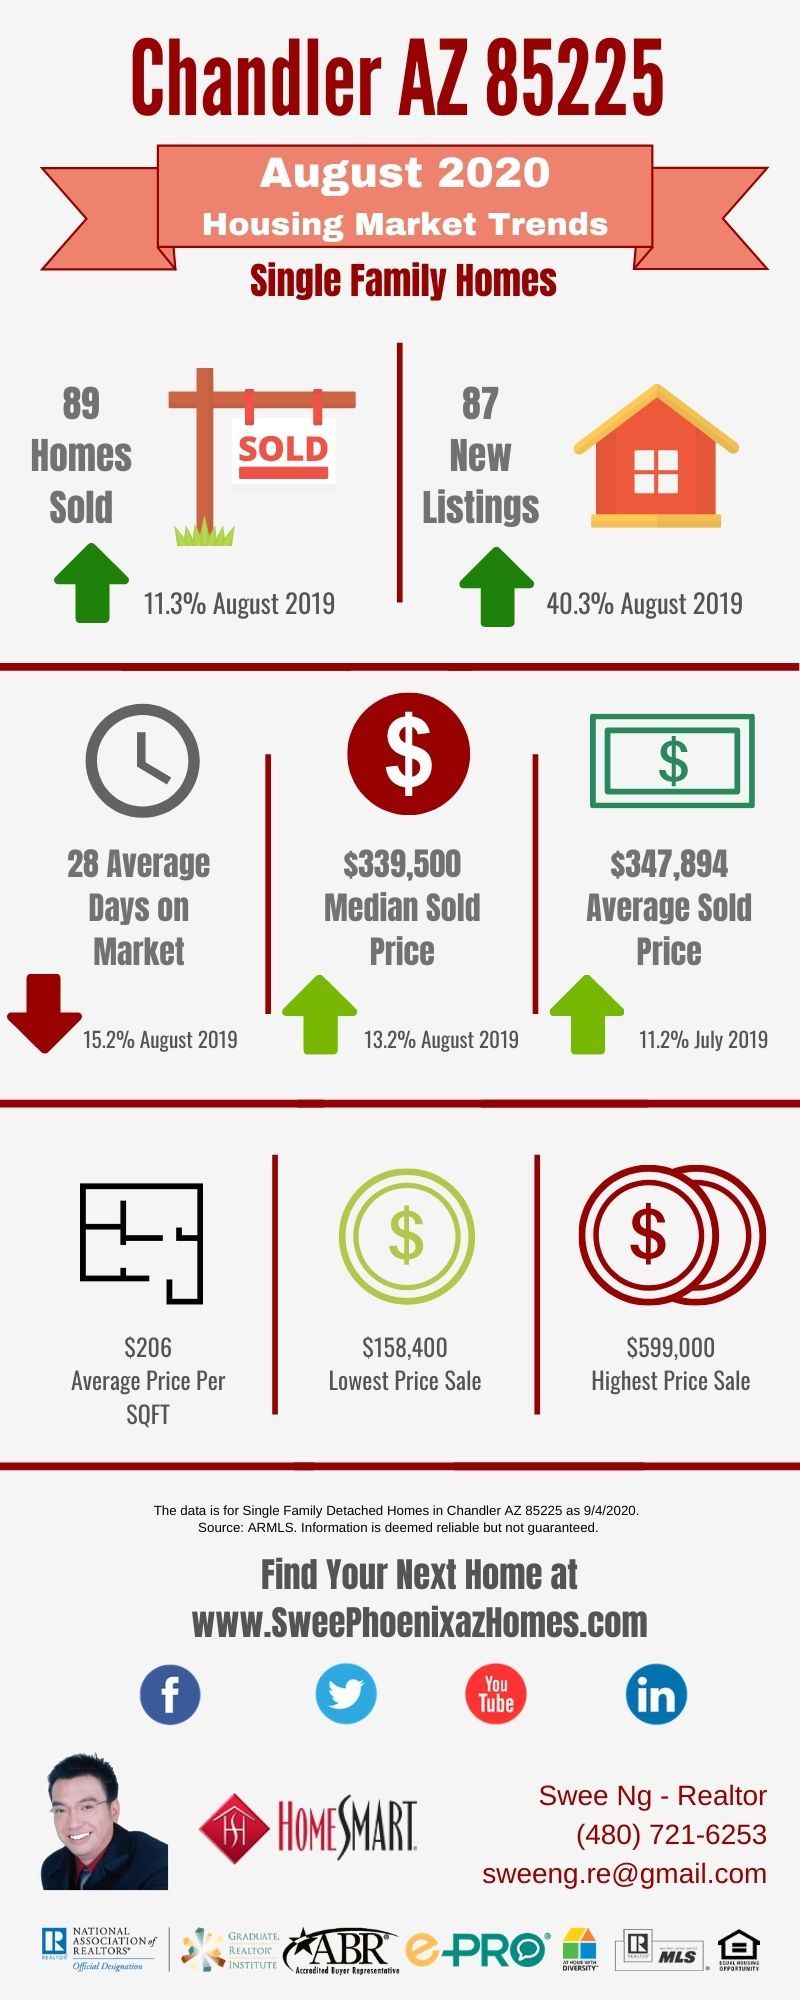 Chandler AZ 85225 Housing Market Trends Report August 2020, House Value, Real Estate and Statistic by Swee Ng